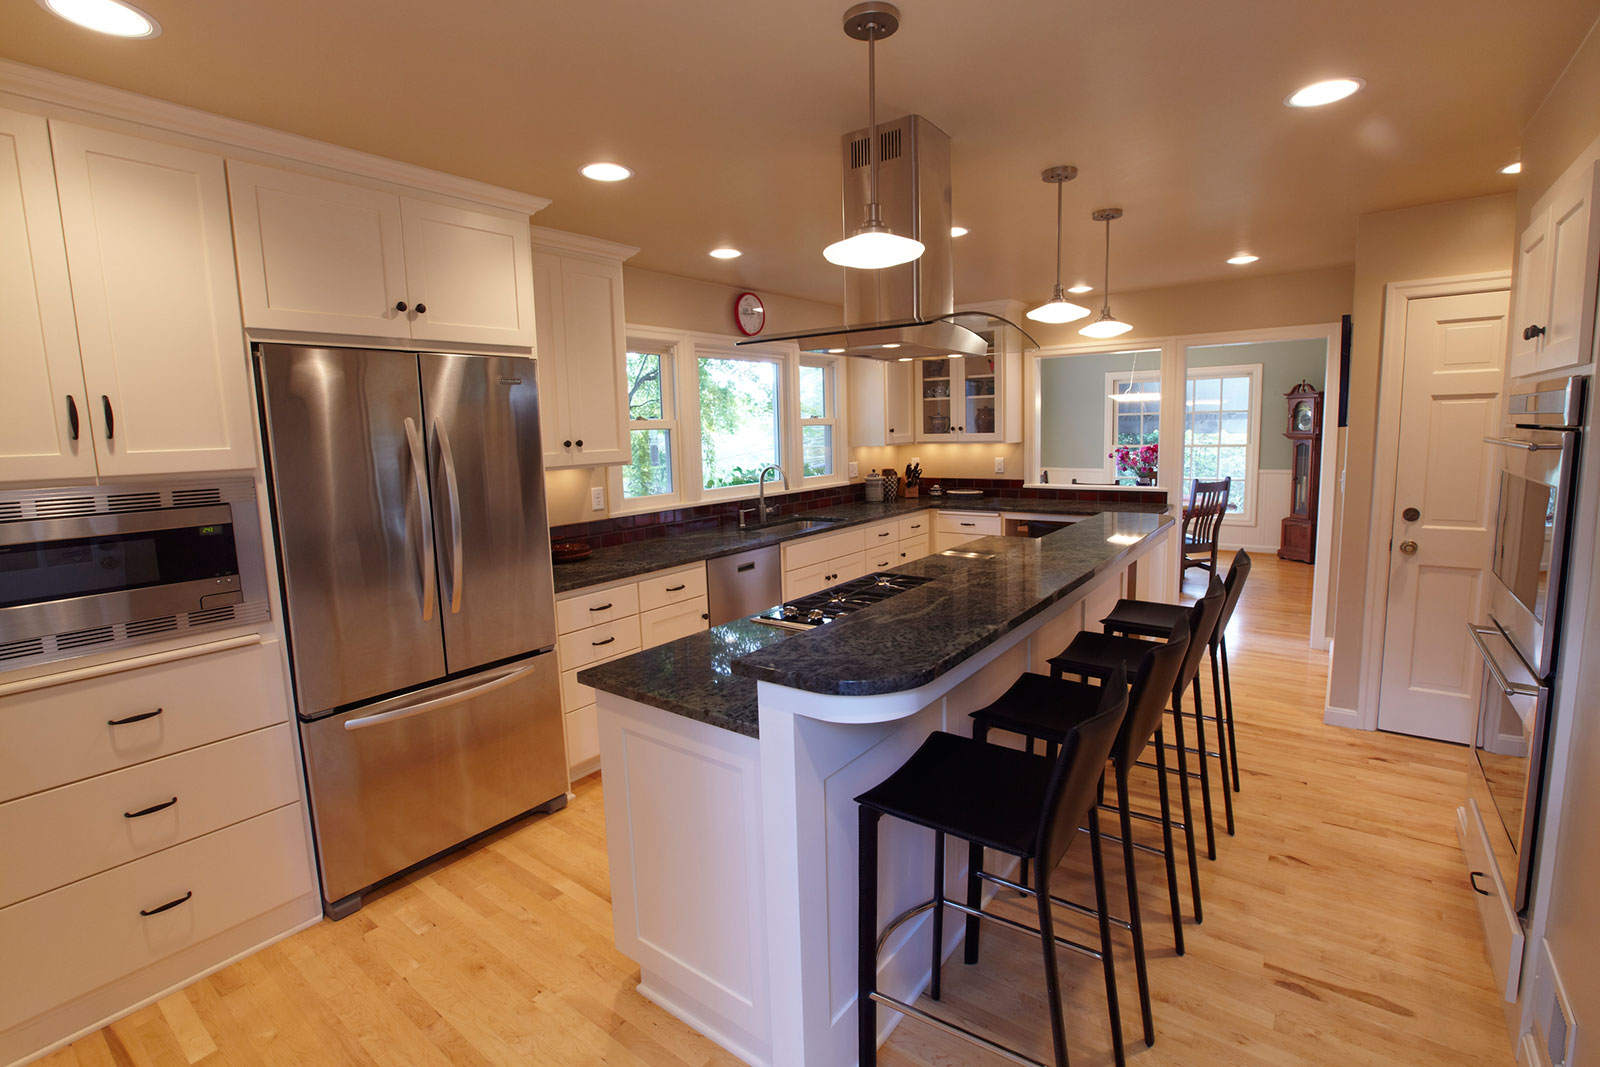 Proskurowski Kitchen and Dining Room Remodel